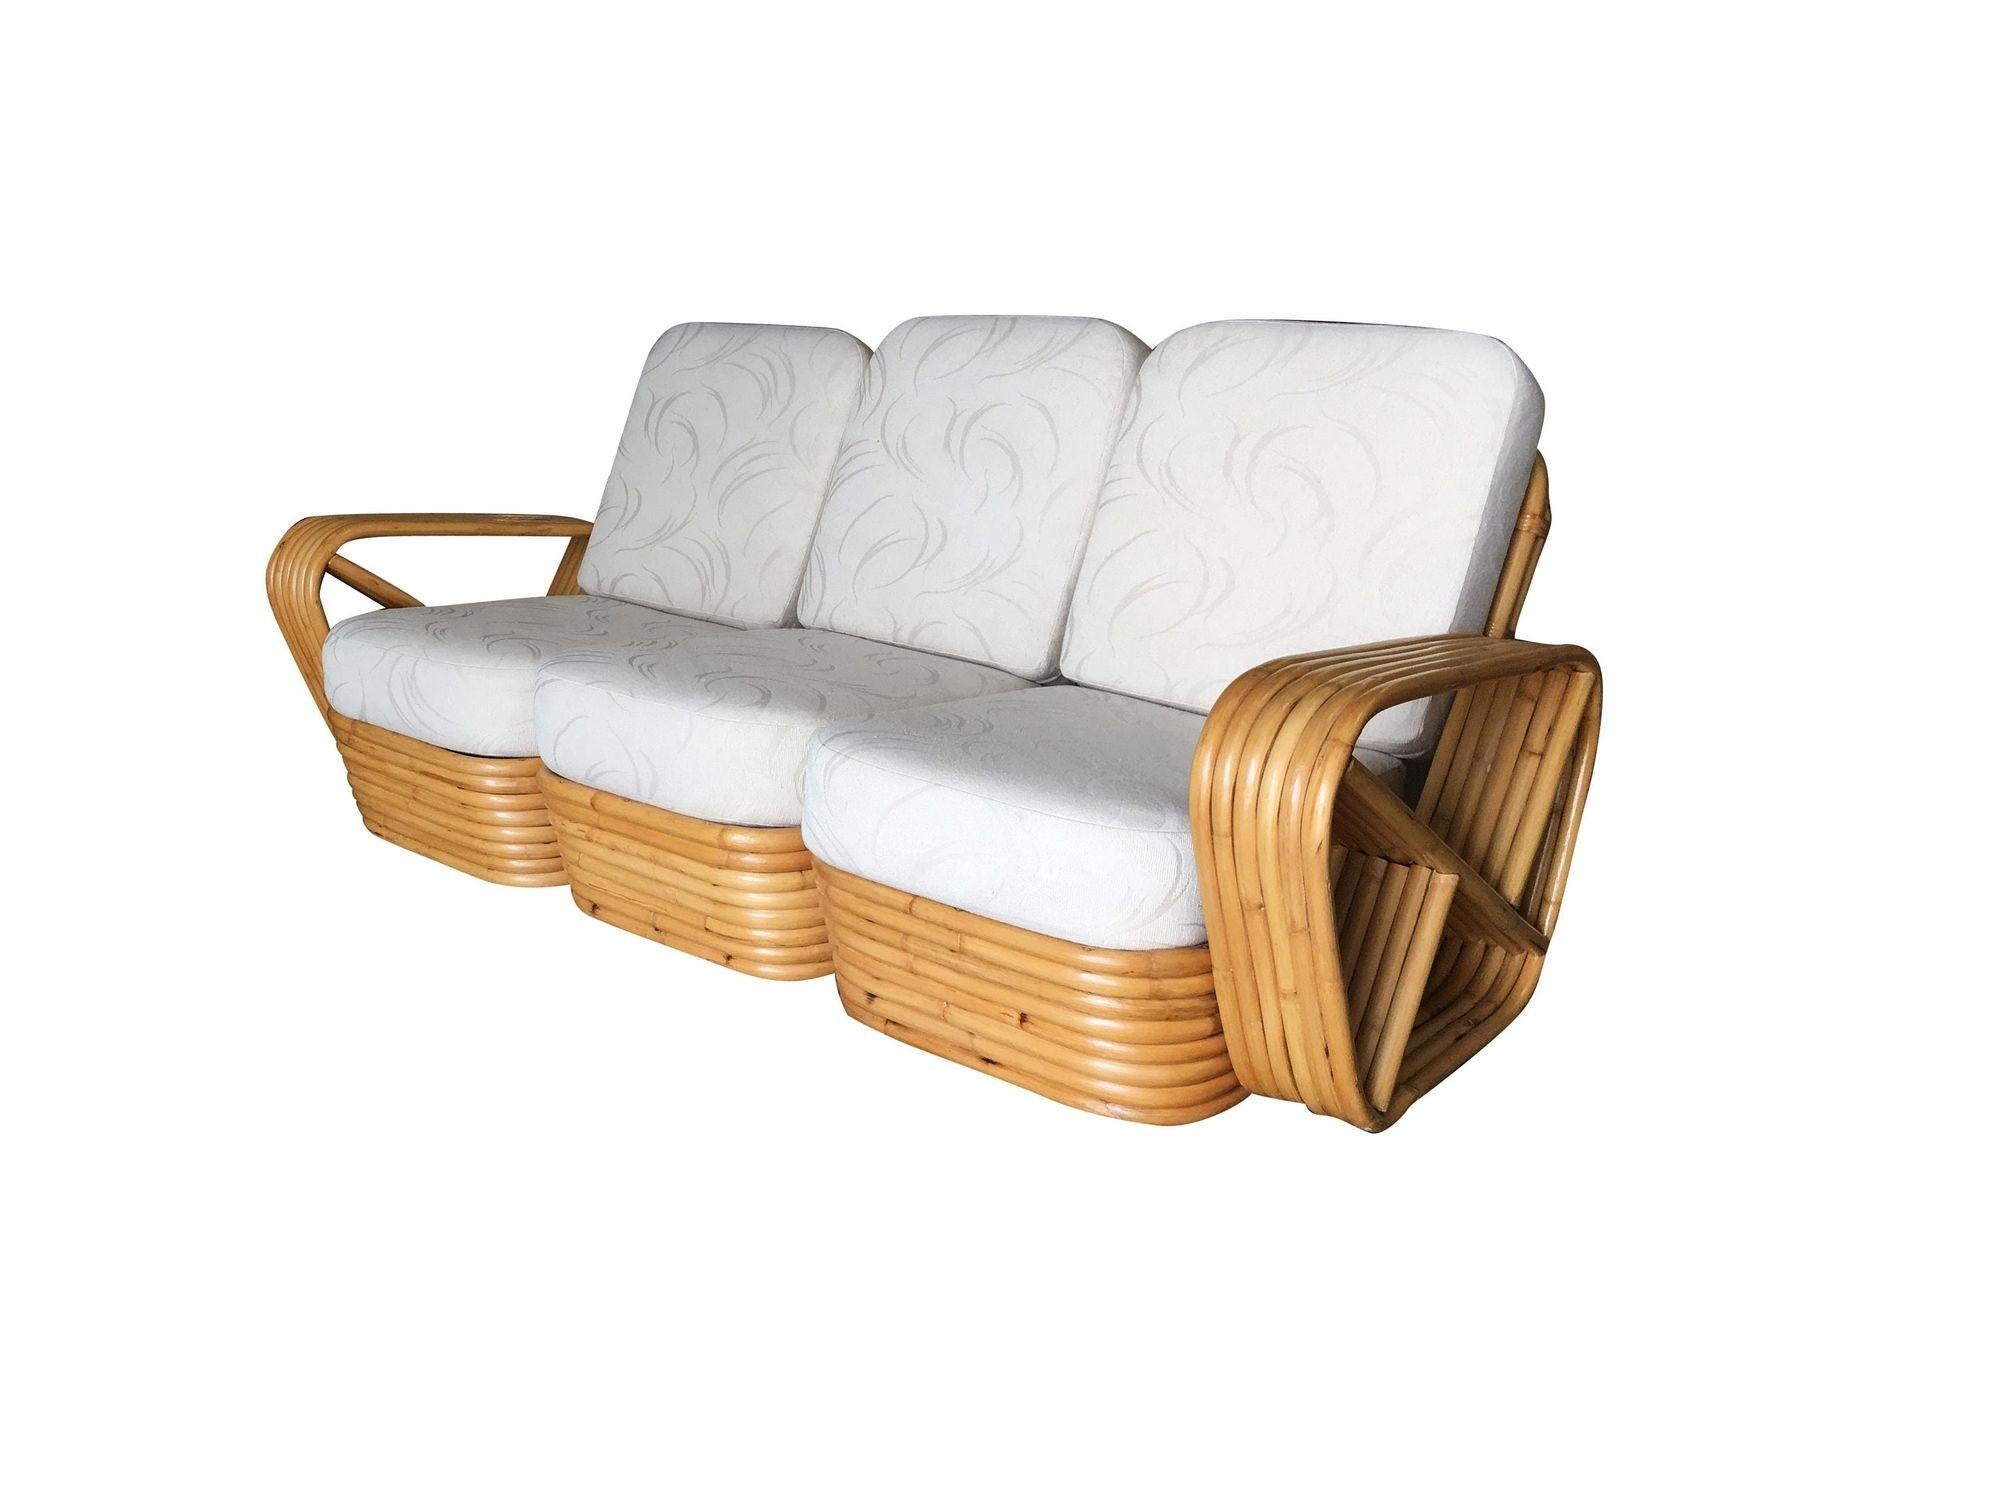 Six-strand square 3/4 pretzel style, three-seat sectional sofa. This sofa features the famous five-strand square pretzel side arms and a stacked rattan base influenced by Paul Frankl.

Measures:
Sofa: 34